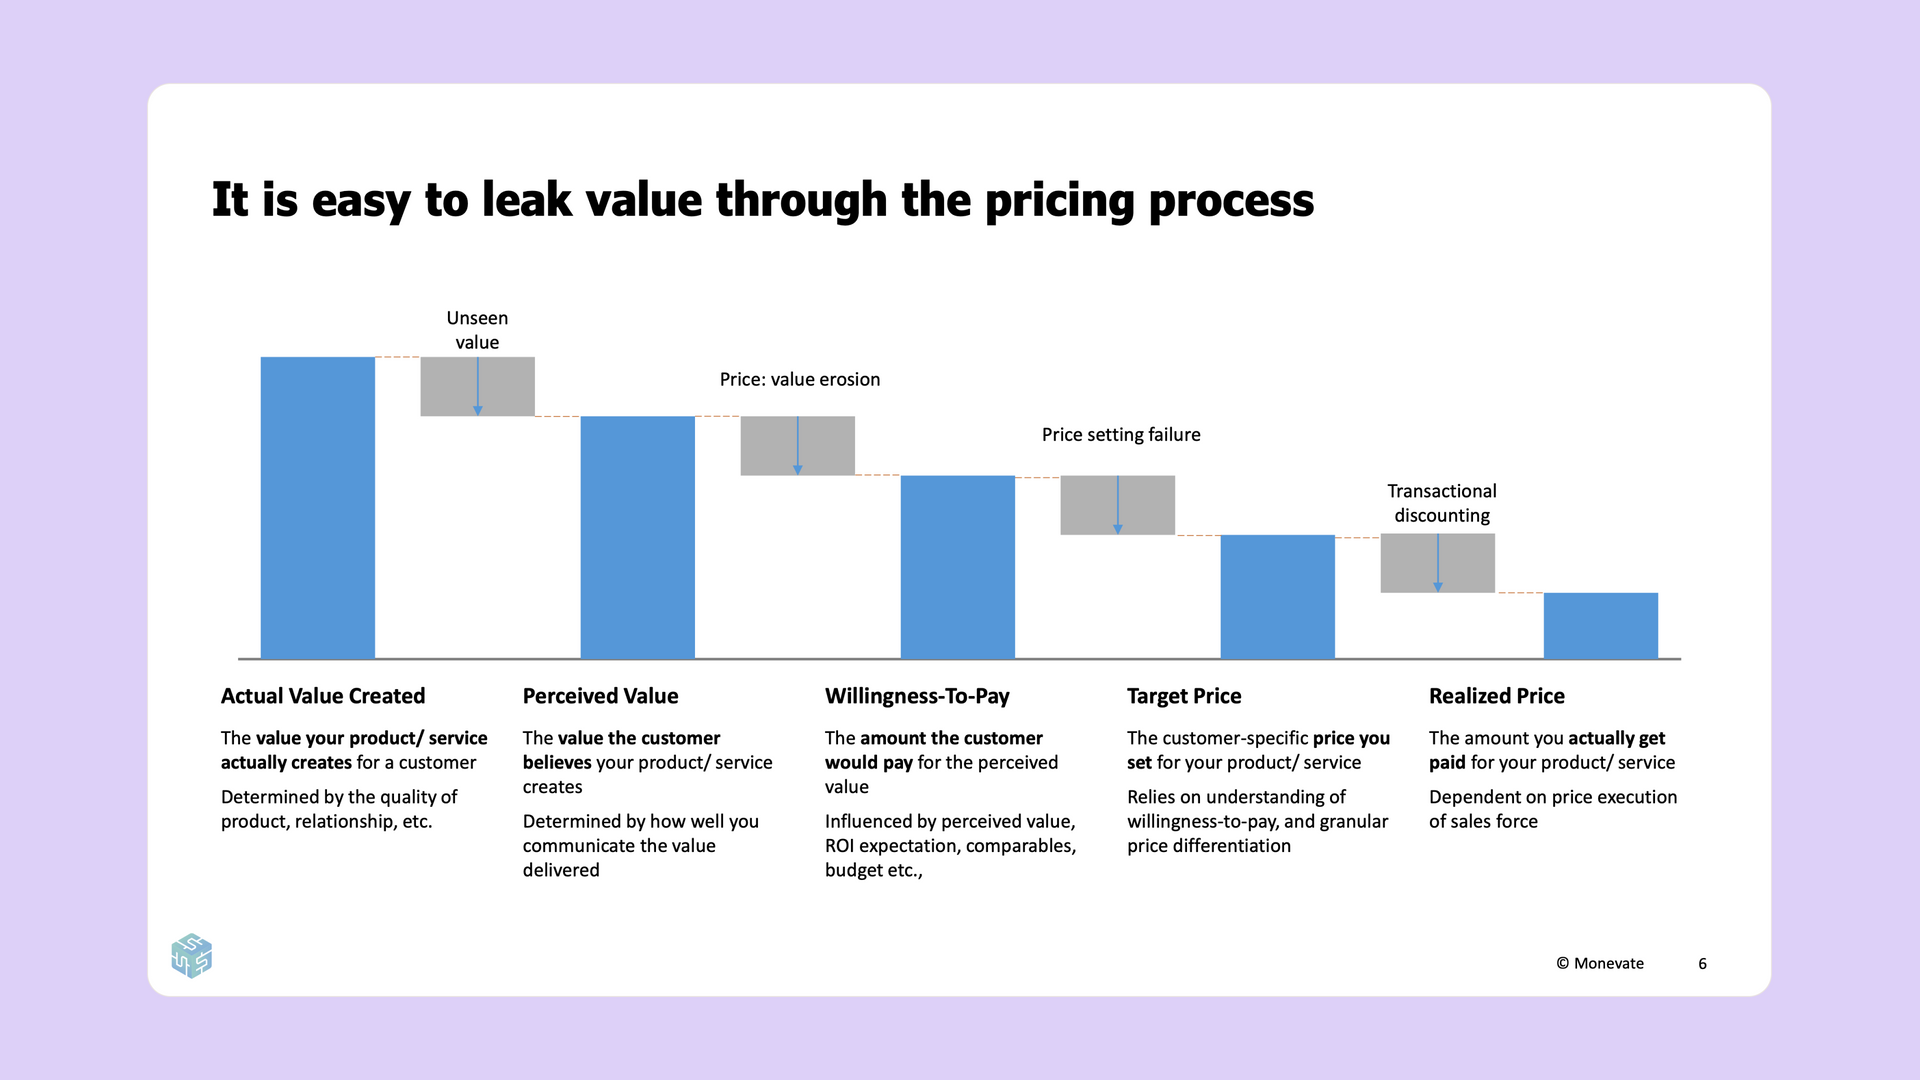 a graph shows that it is easy to leak value through the pricing process